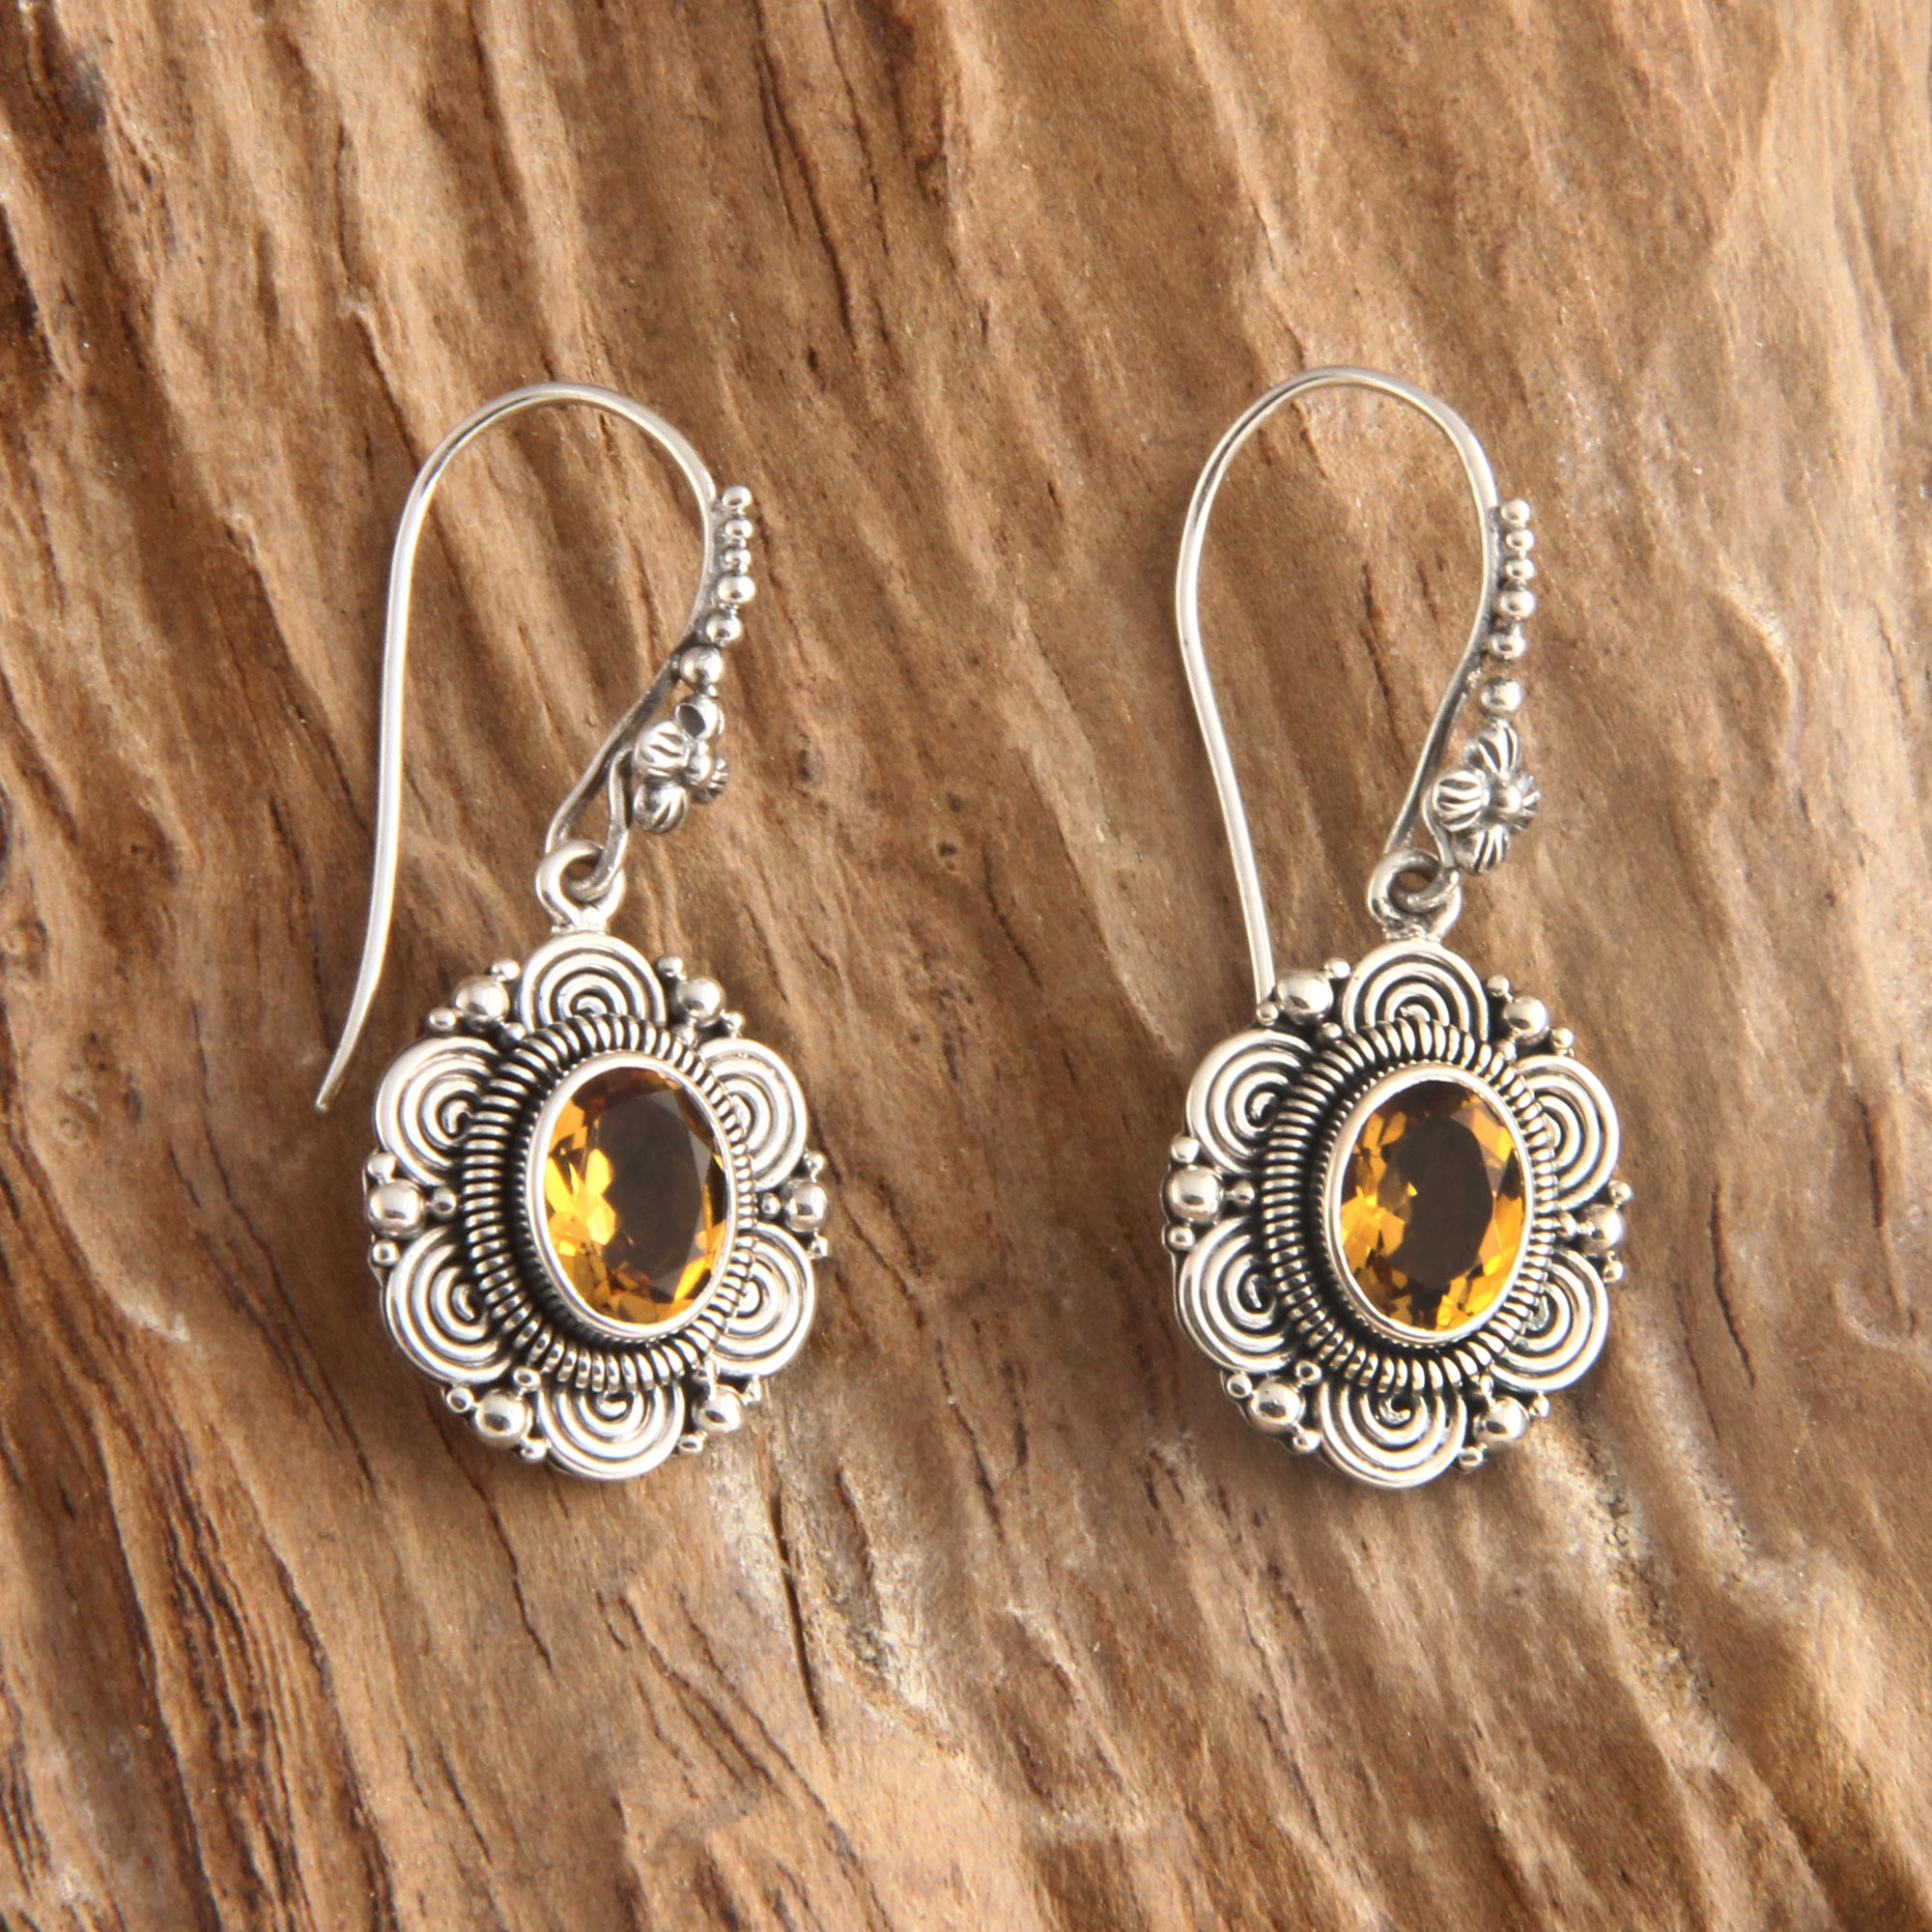 Sunflower Earrings In Stering Silver With Citrine